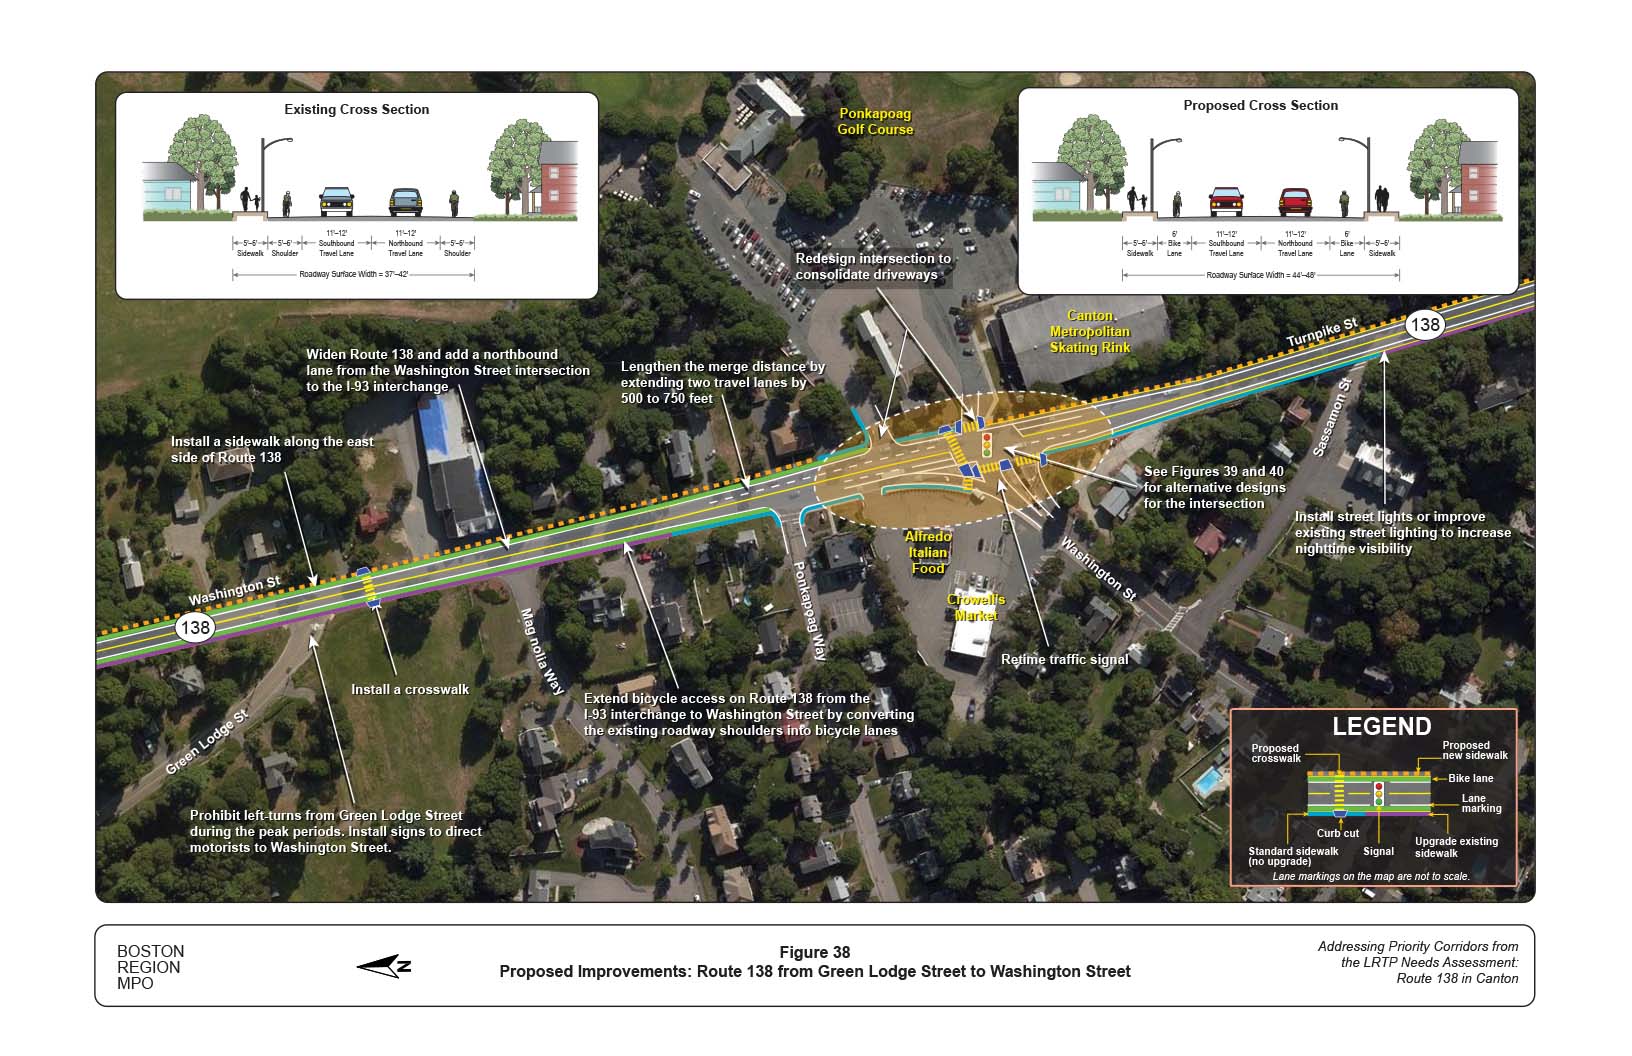 Figure 38 is map of Route 138 at Green Lodge and Washington Street with overlays showing the proposed improvements to the roadway and graphics of the current and proposed cross section of the roadway.